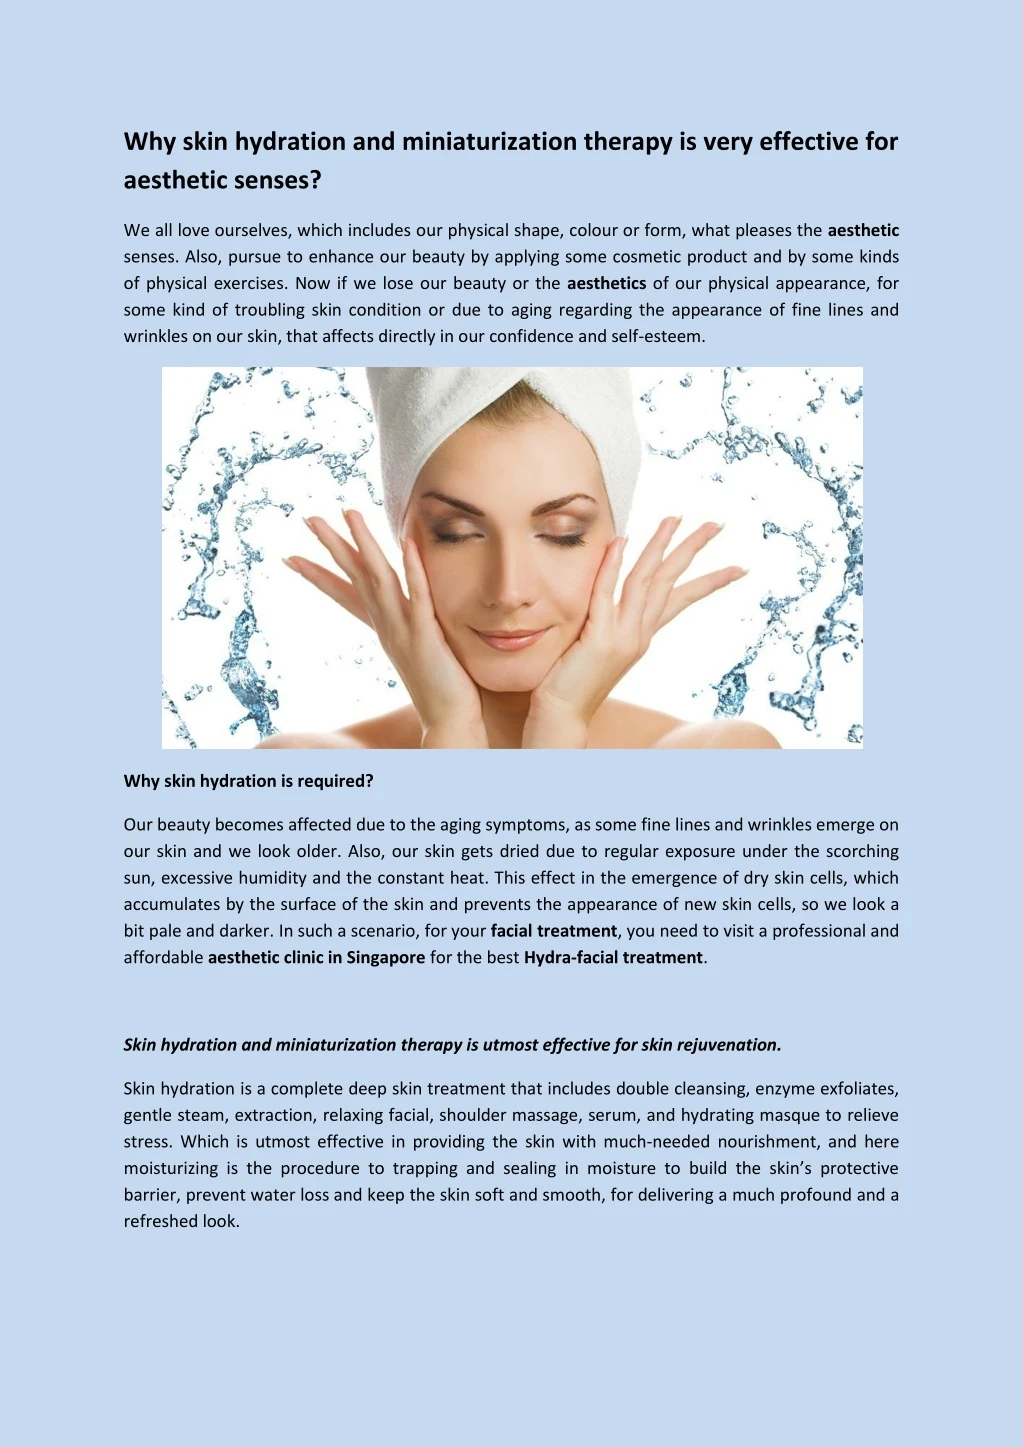 why skin hydration and miniaturization therapy